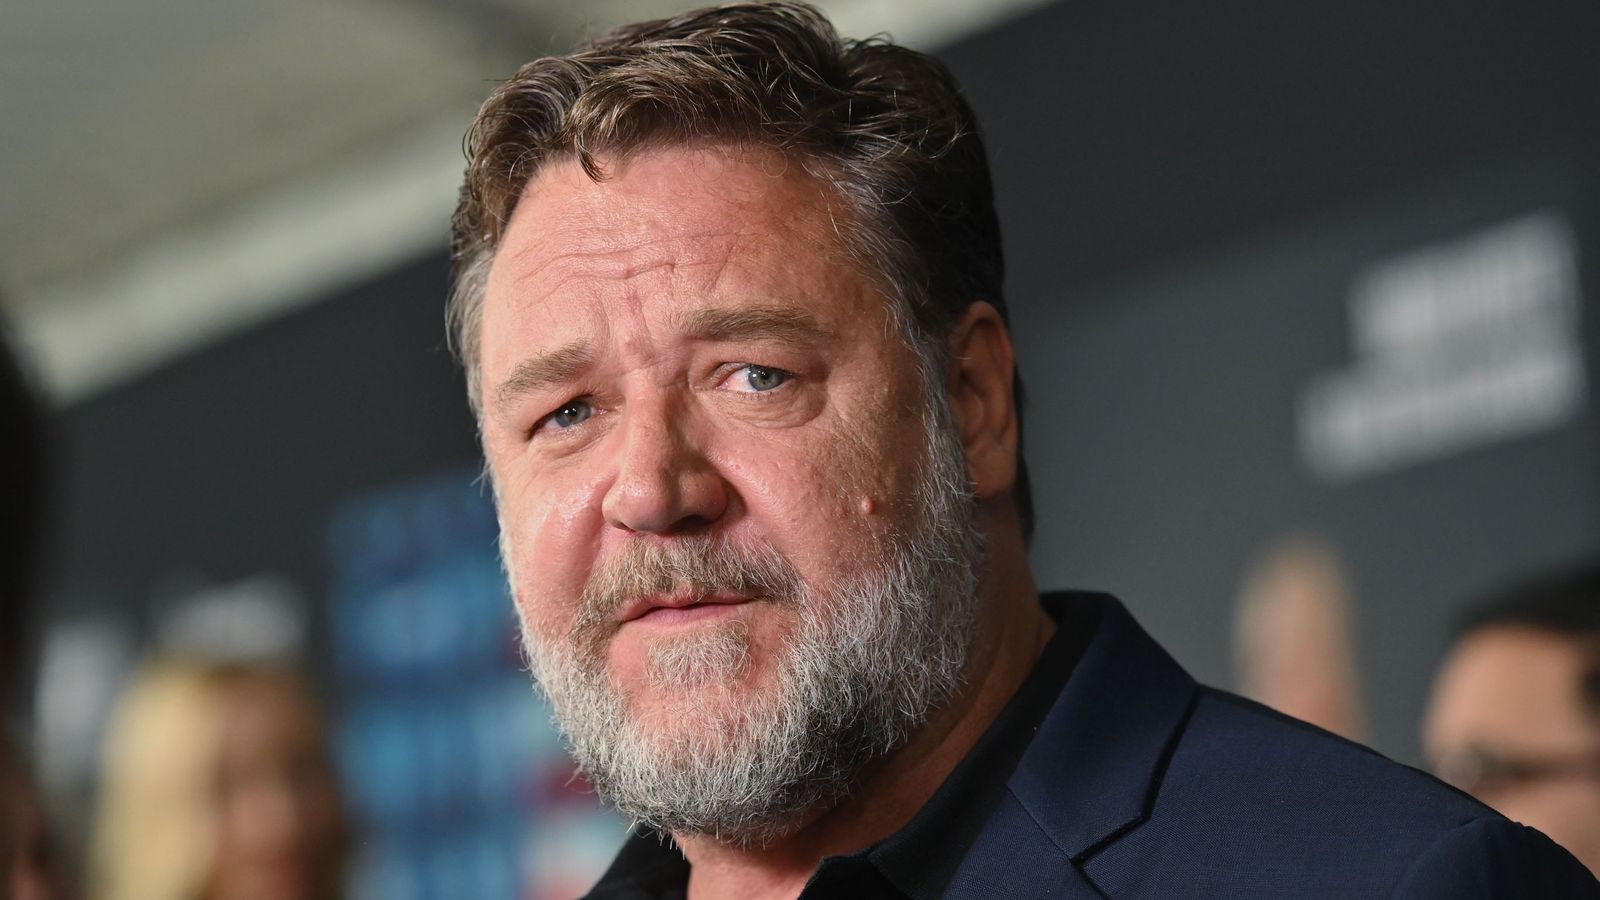 Russell Crowe uses Golden Globe win to highlight Australia bushfires